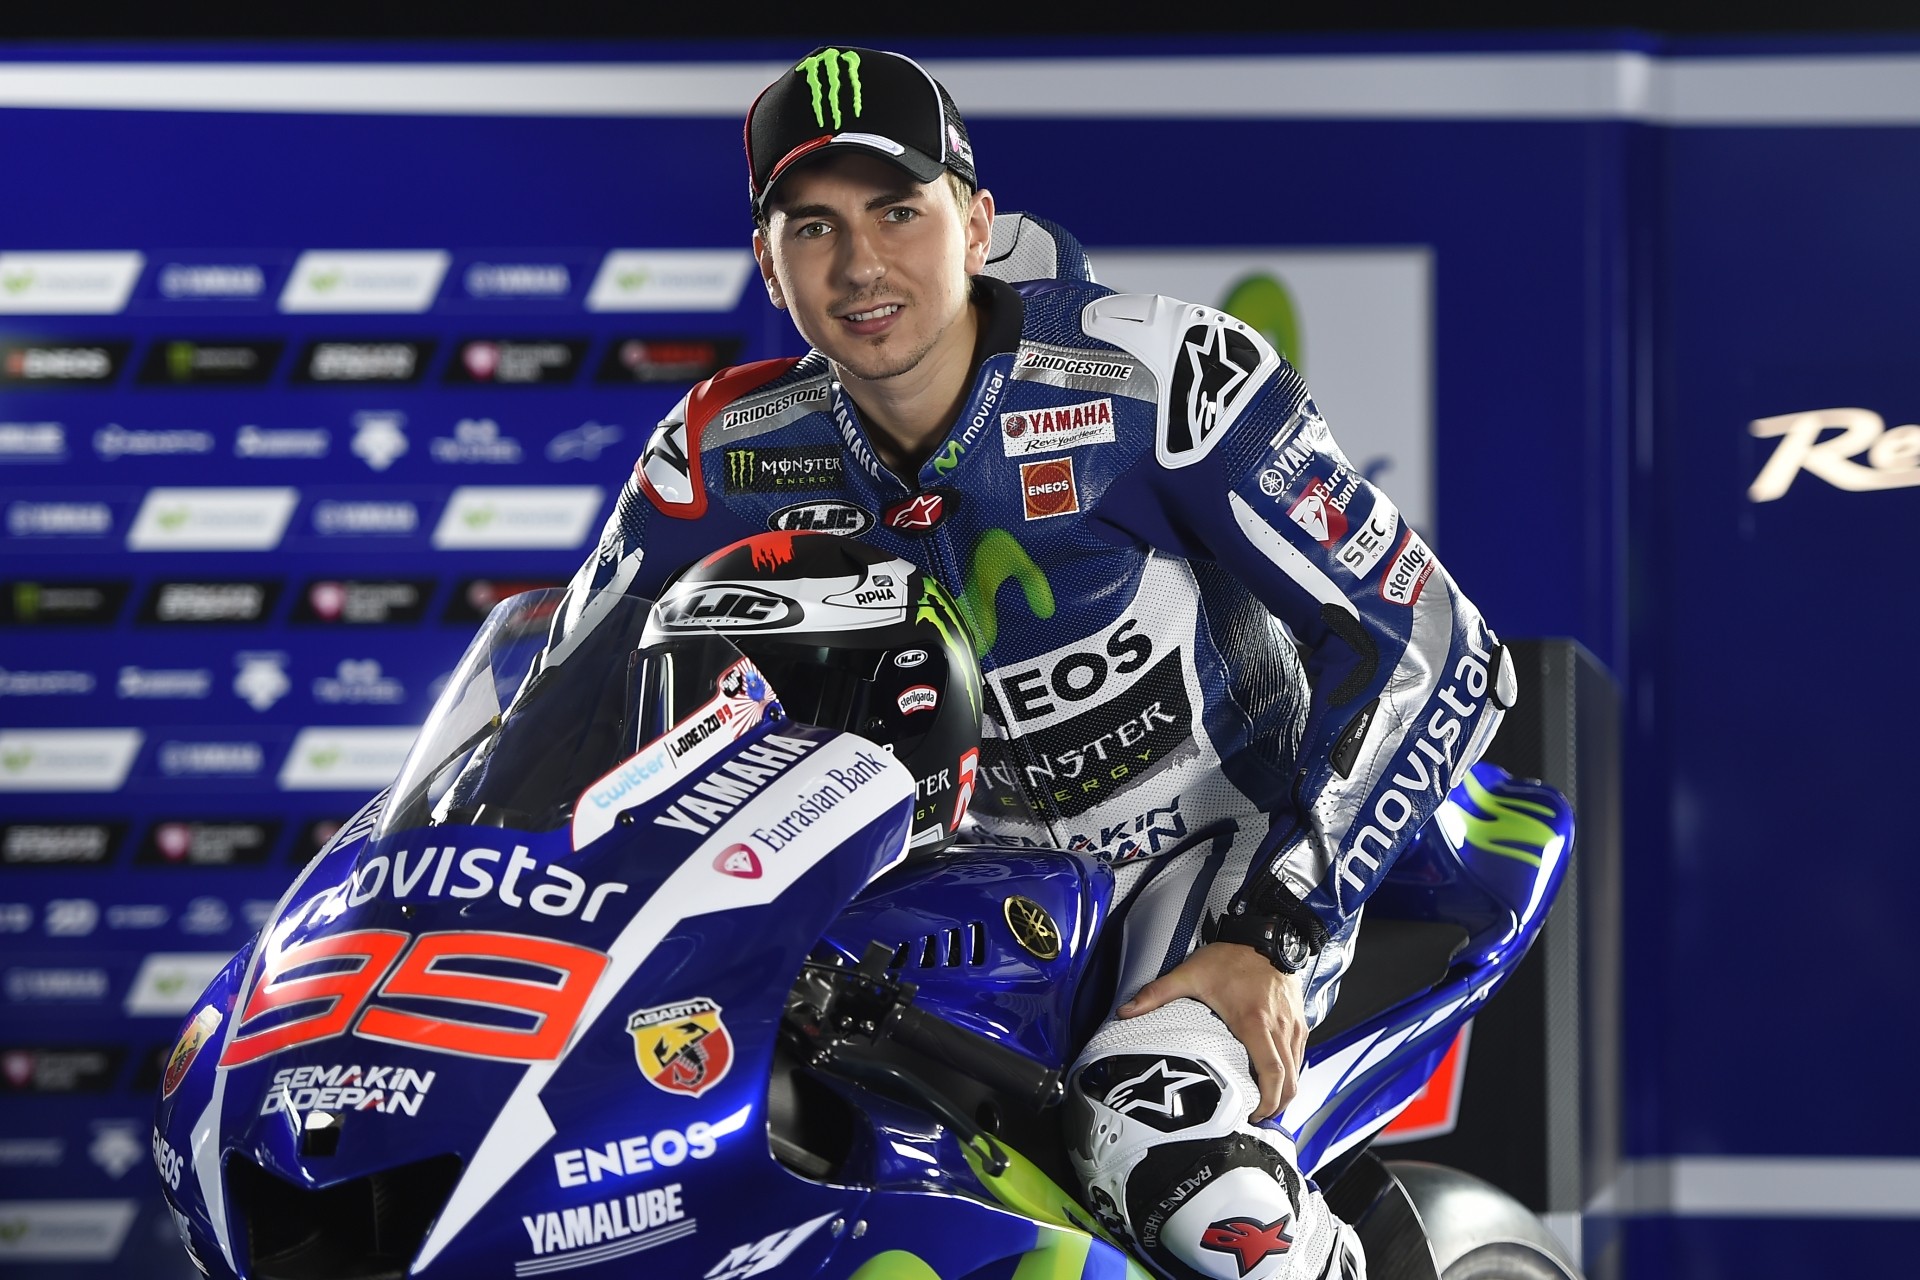 High-Res Photos of the 2015 Yamaha YZR-M1 with Rossi and Lorenzo ...